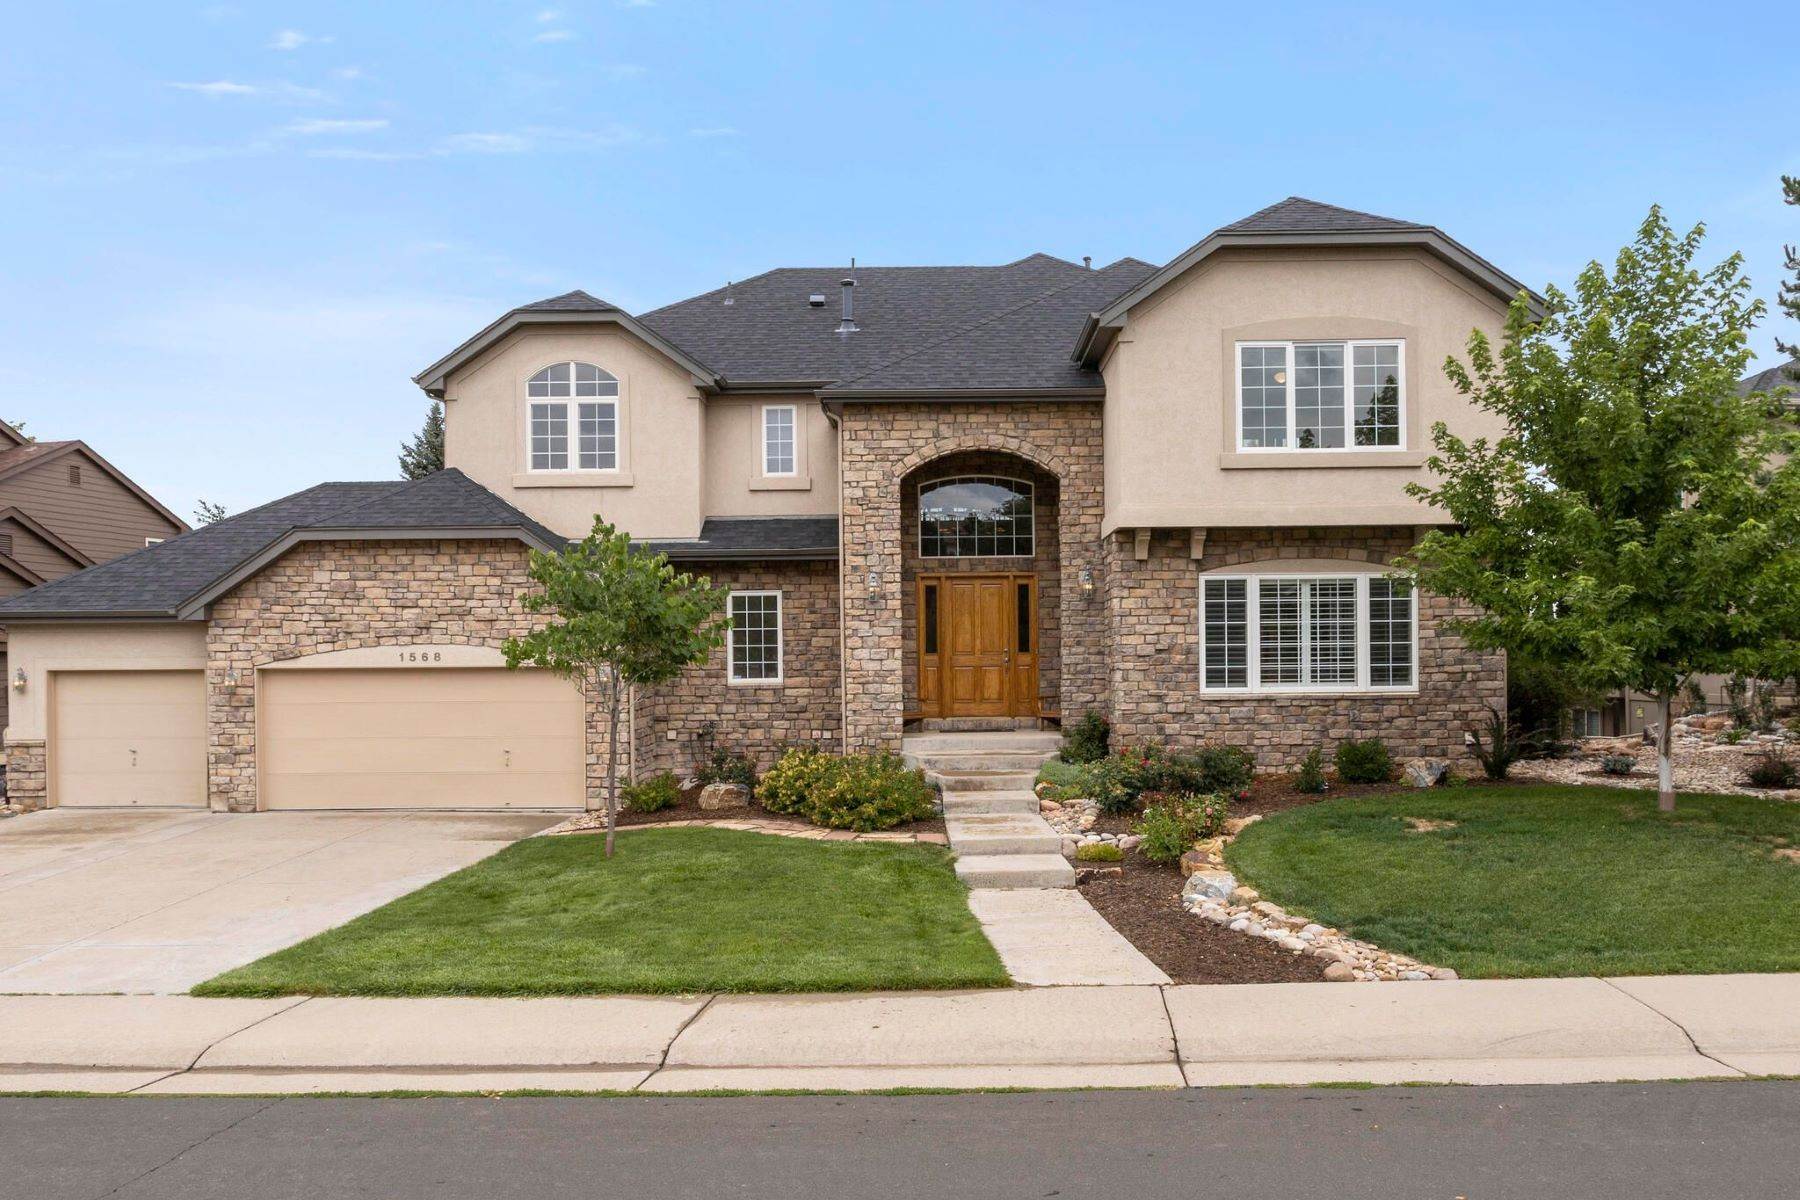 Single Family Homes for Active at A delightful traditional two-story home with a finished walk-out basement! 1568 Meyerwood Circle Highlands Ranch, Colorado 80129 United States